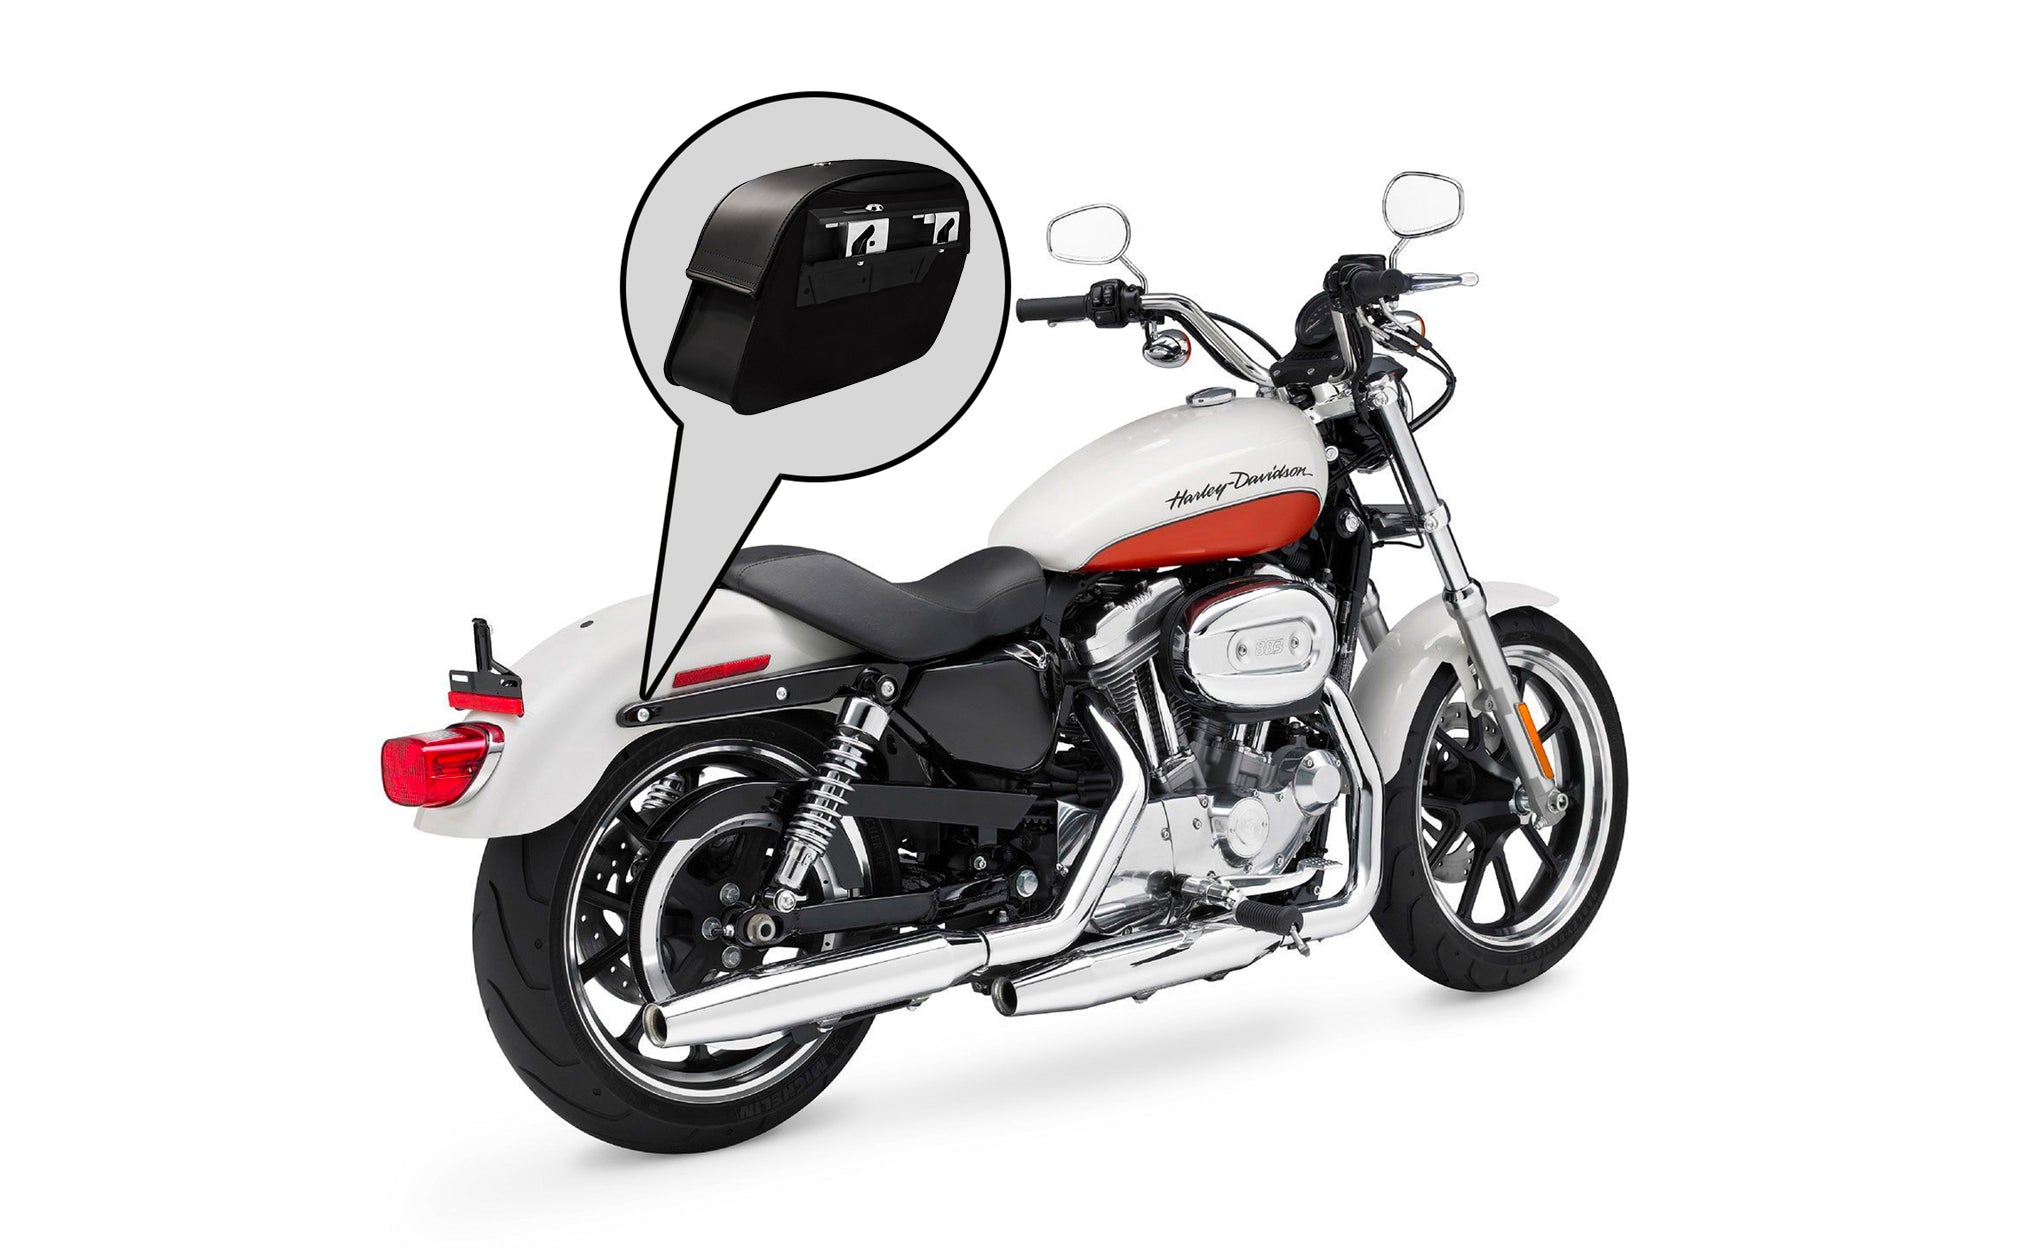 Viking Saddlebags Quick Disconnect System For Suzuki Intruder 1500 @expand